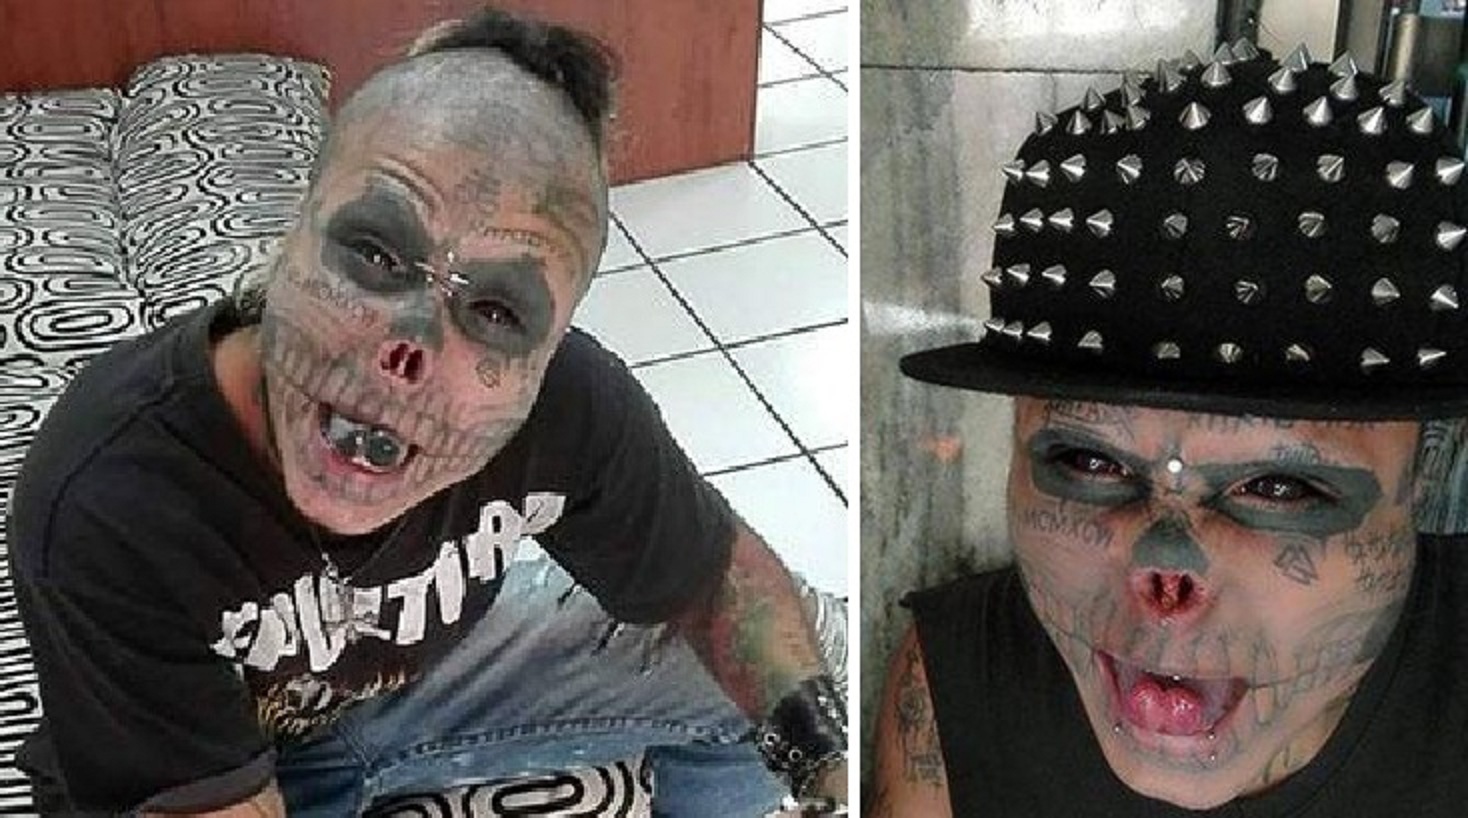 22 Year Old Man gets his Nose Cut-Off to Look Like a Skull